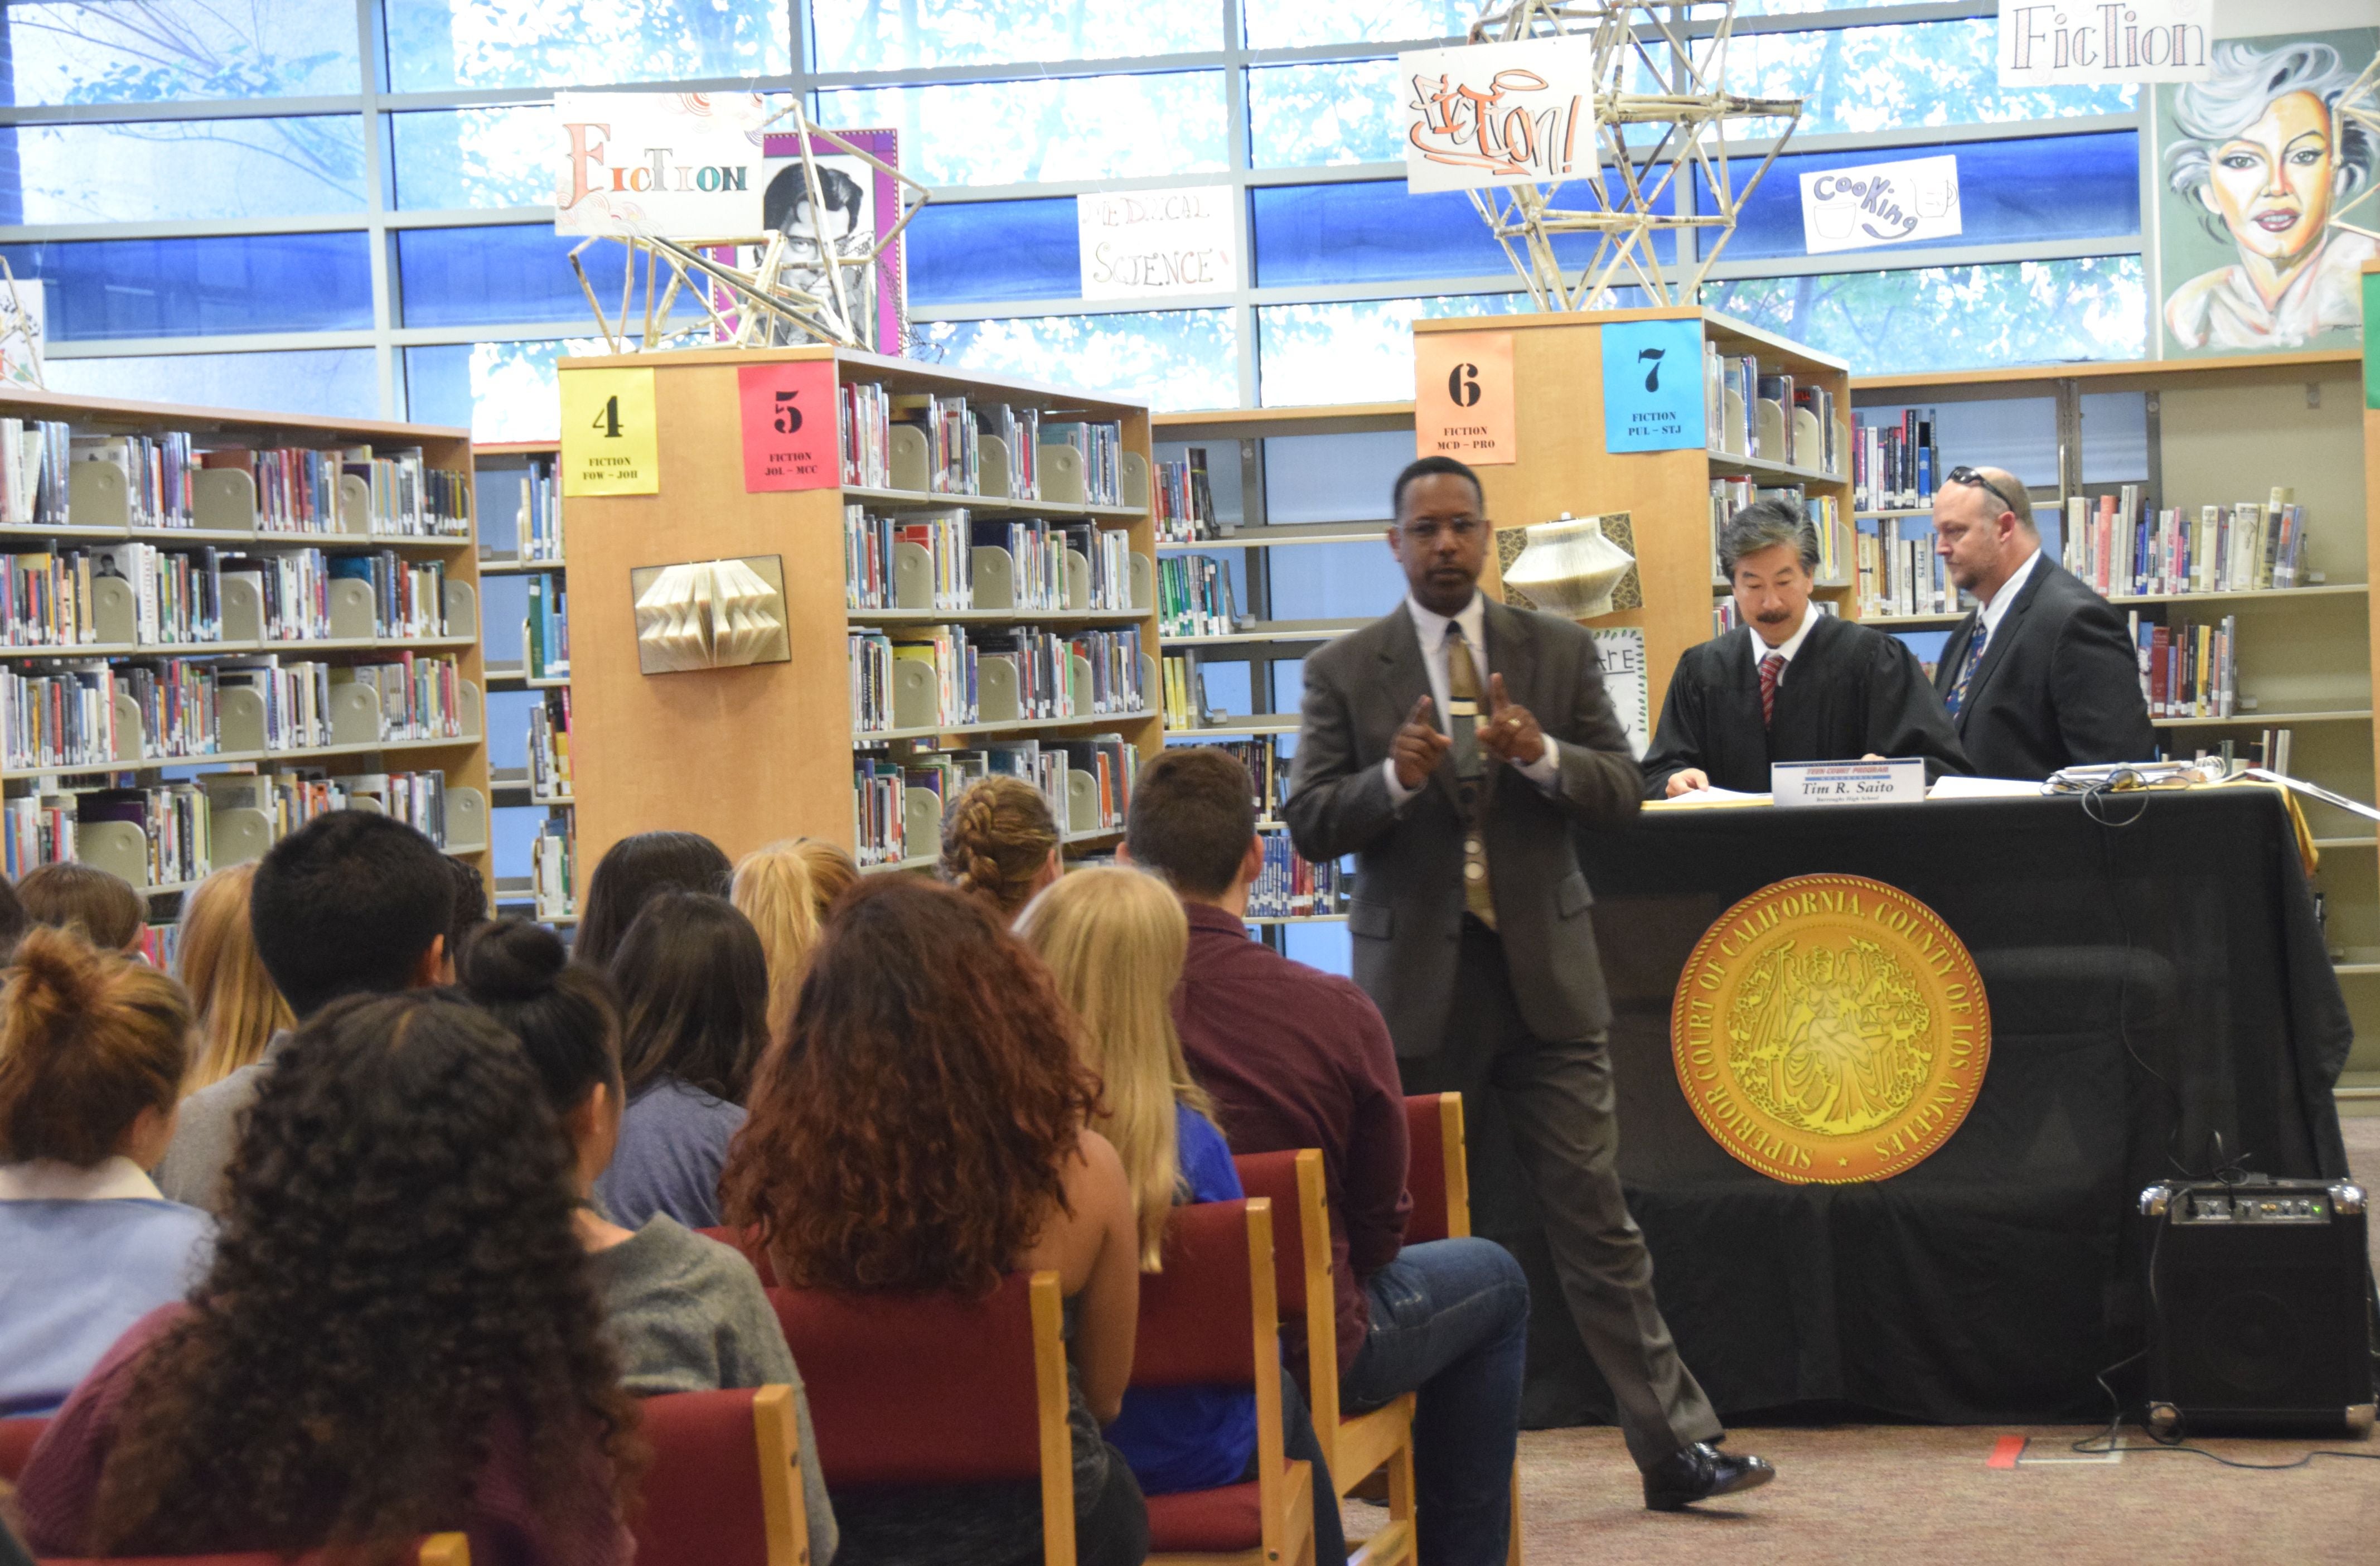 Students pack the library for a teen court session at John Burroughs High School in Los Angeles.